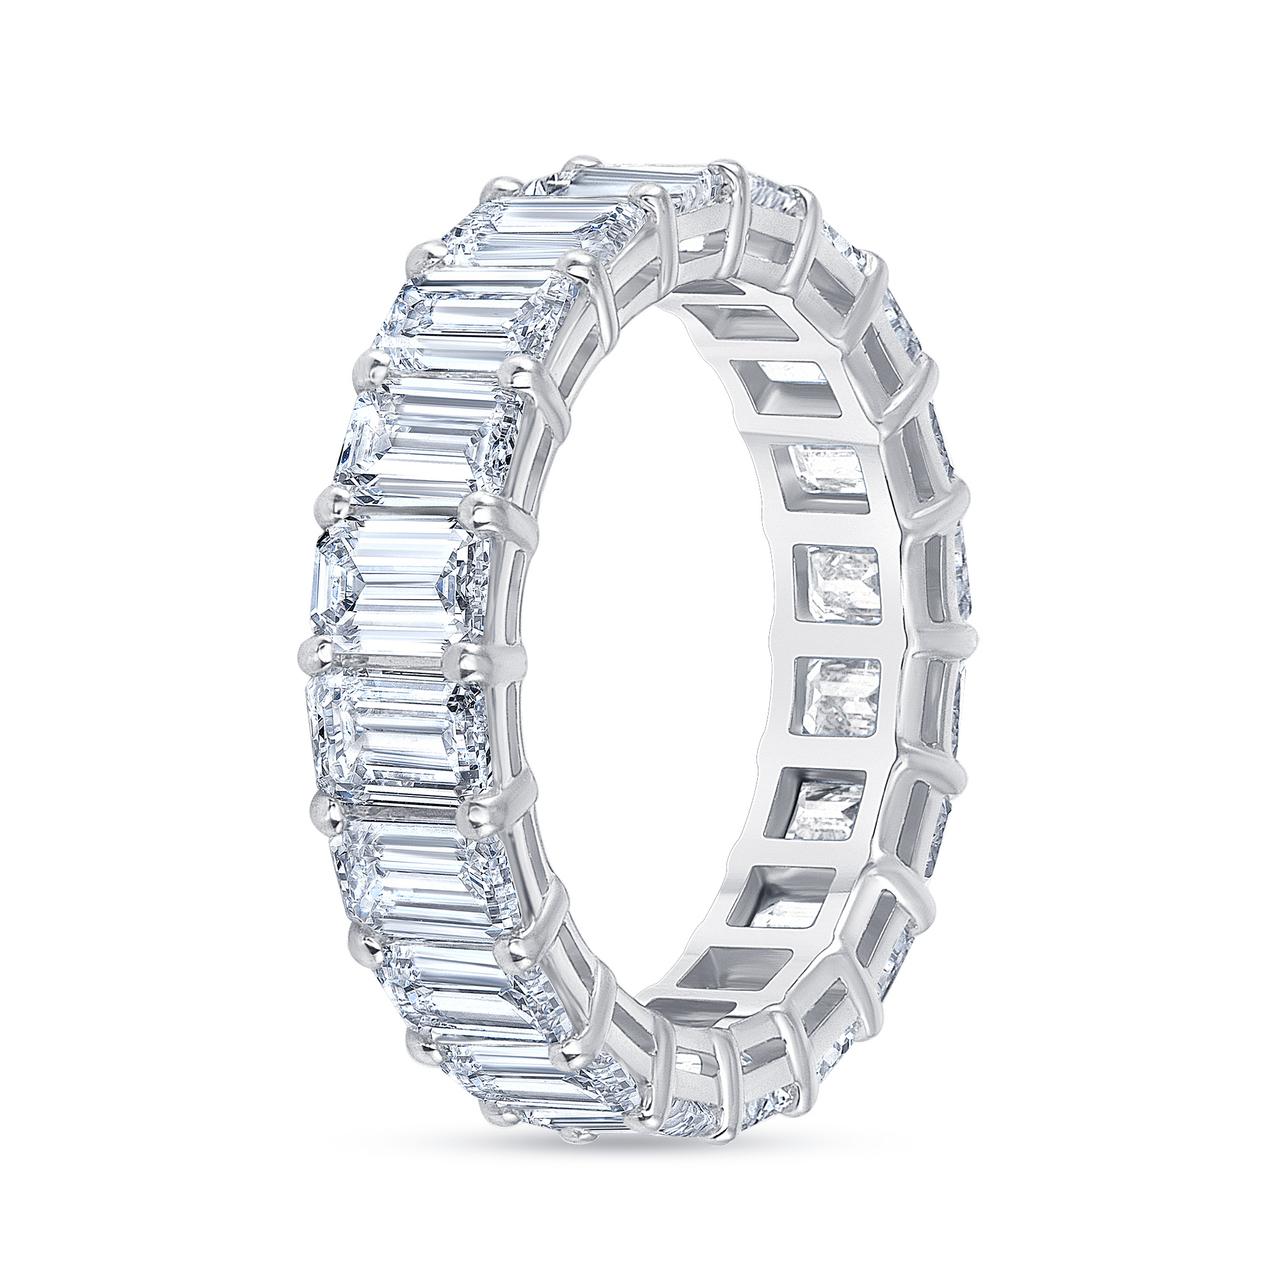 HRD Certified 5.65 Carat Emerald Cut White Diamond Eternity Ring or Band Rings For Sale 2